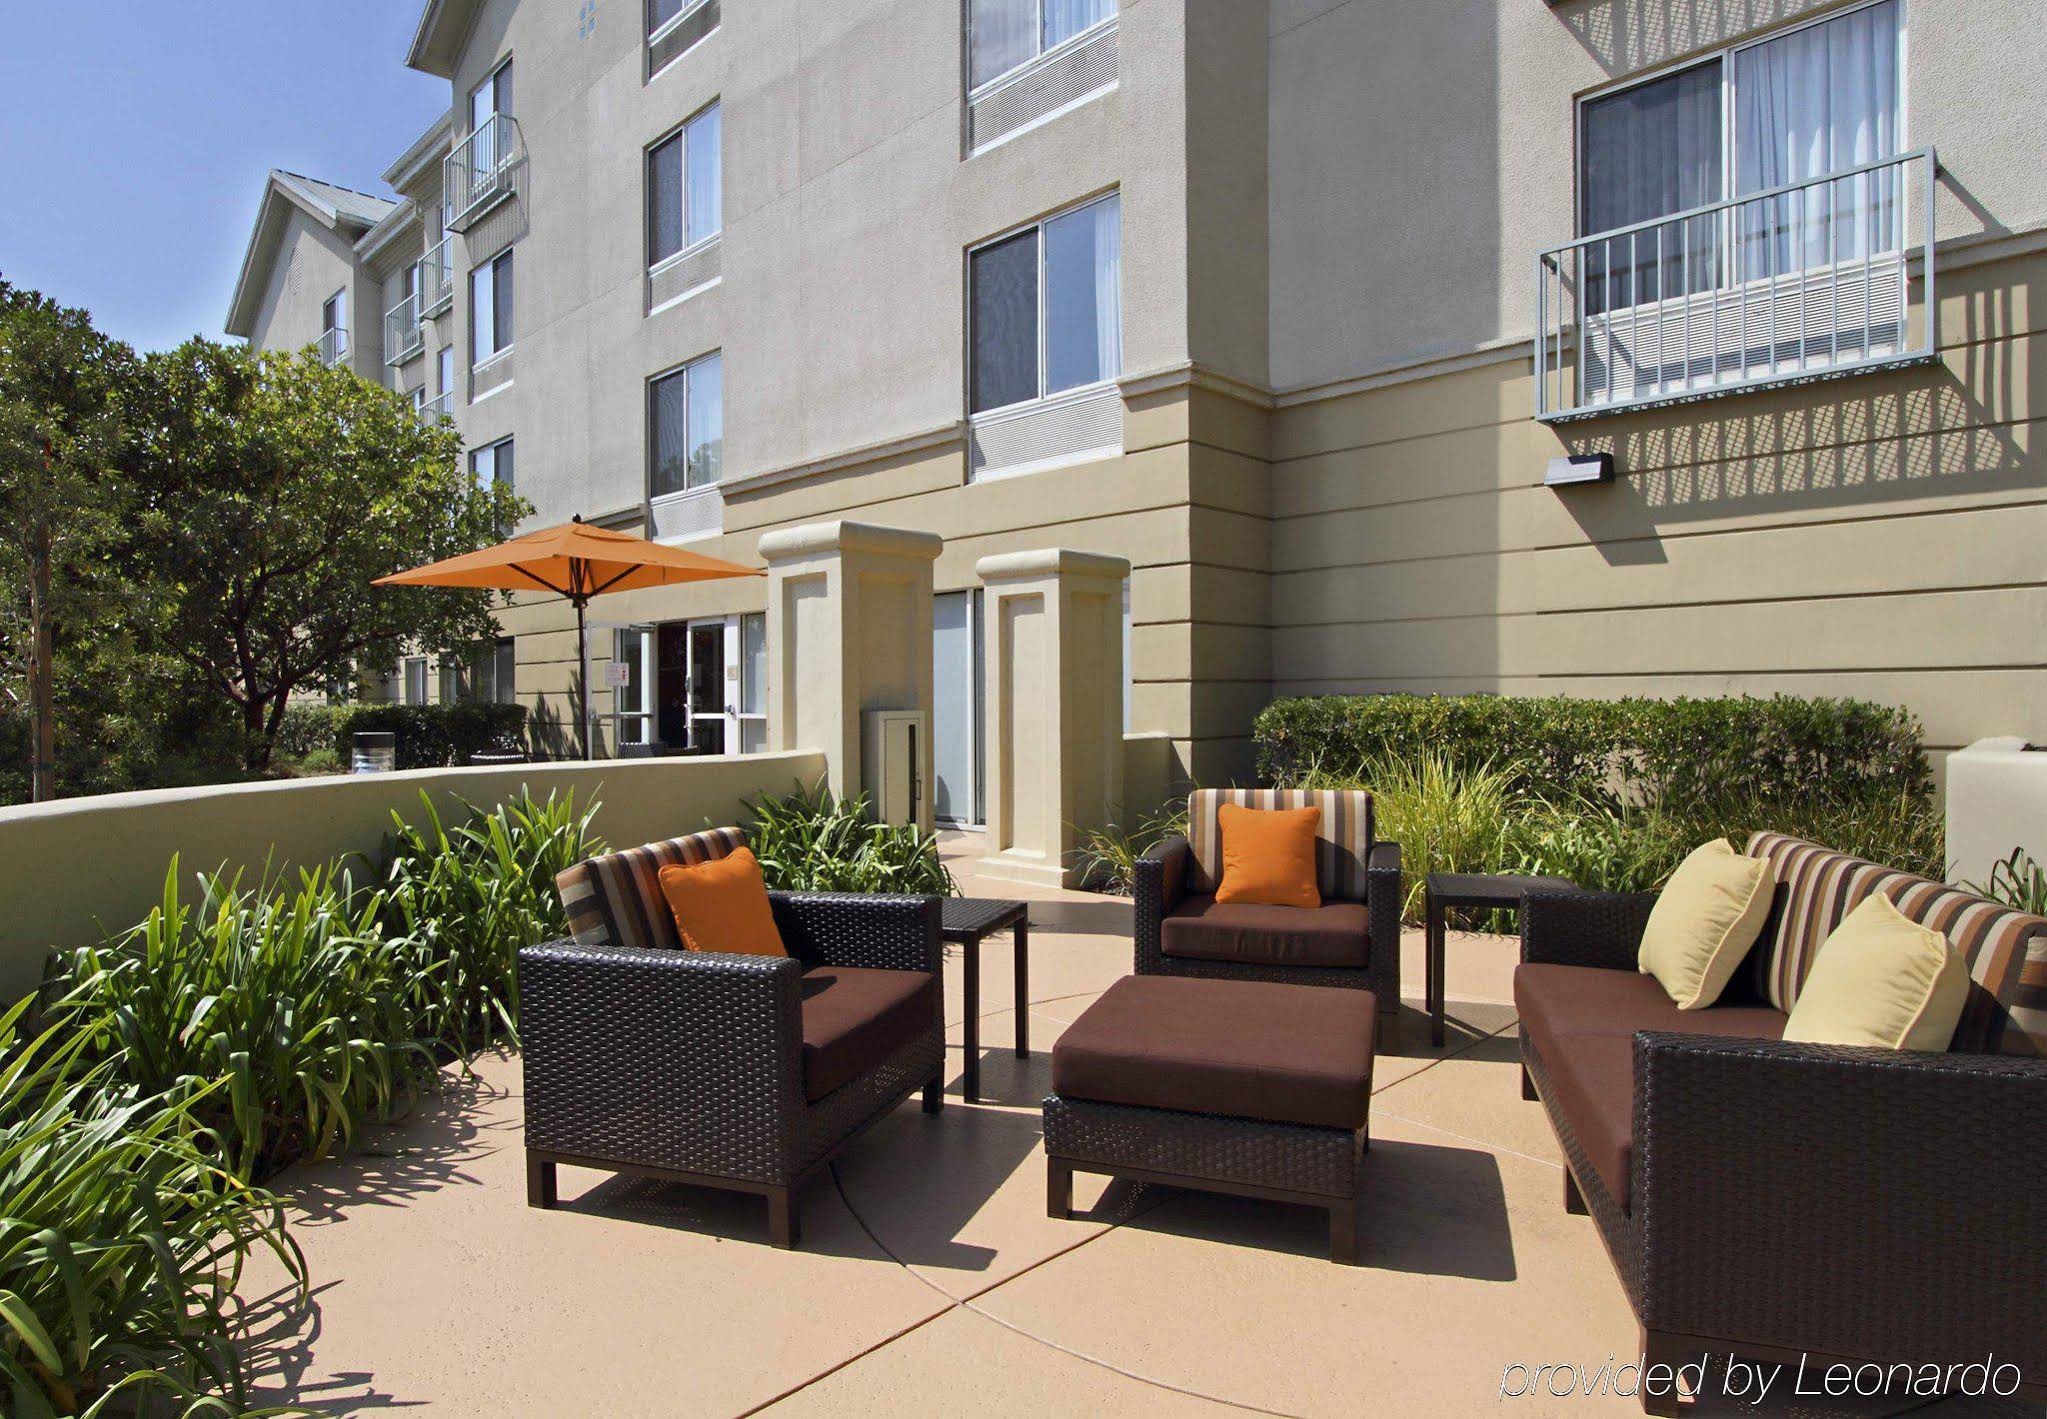 TownePlace Suites Redwood City Redwood Shores